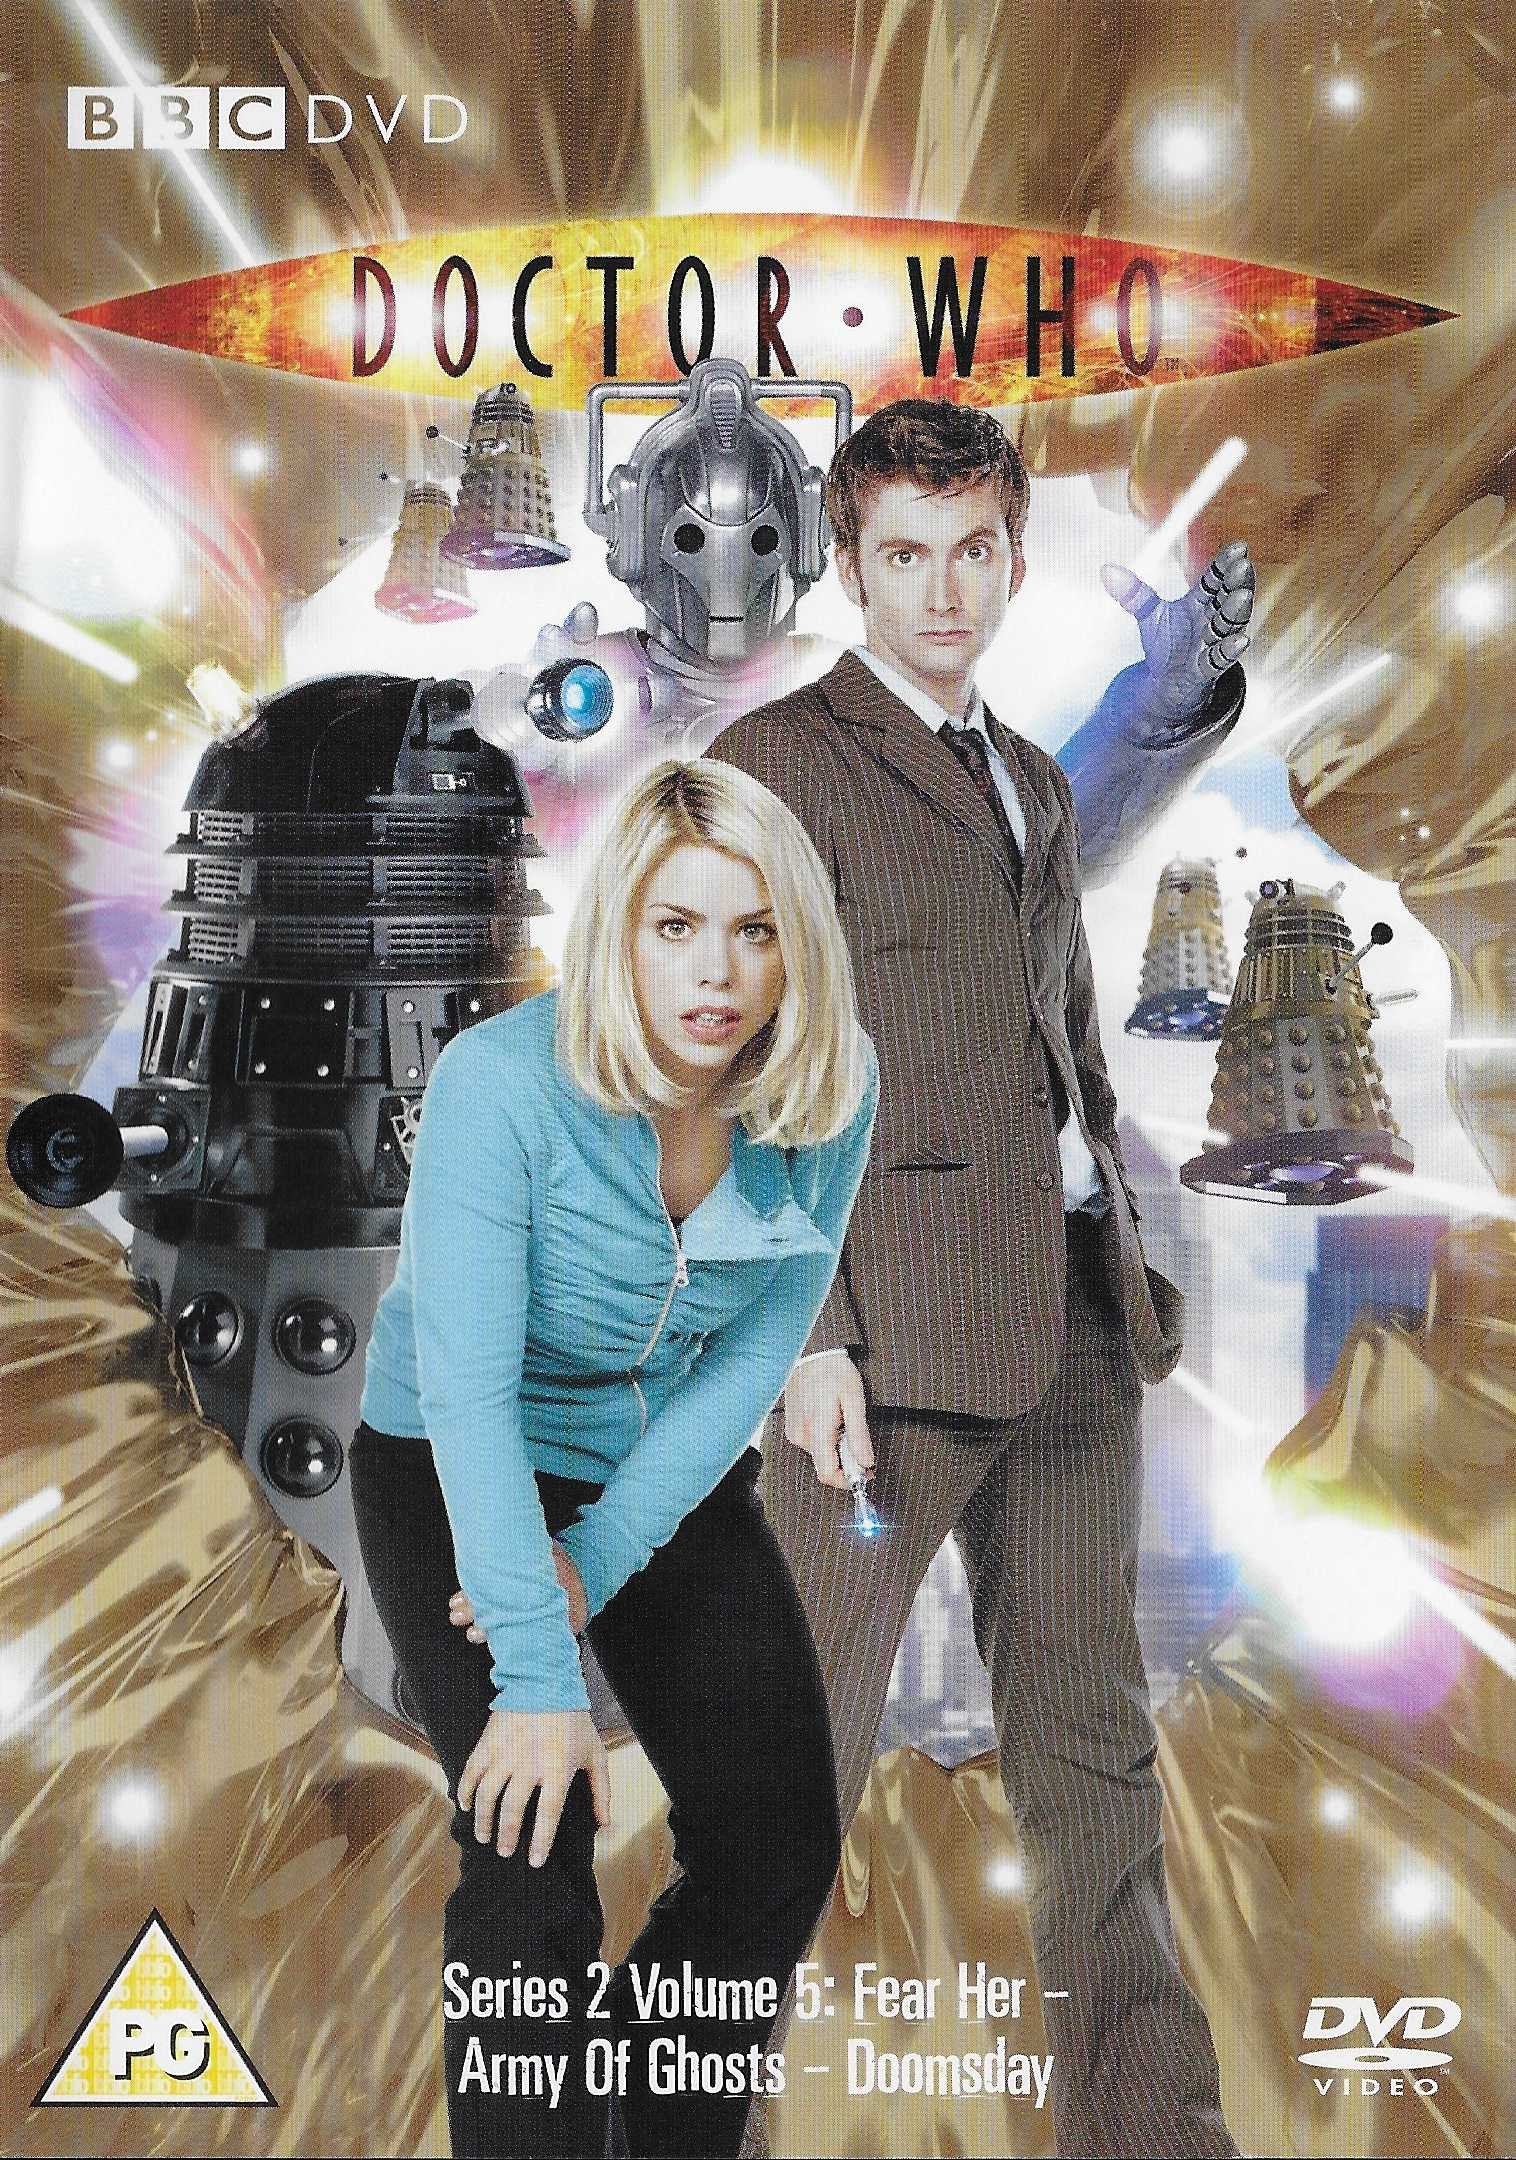 Picture of BBCDVD 1964 Doctor Who - Series 2, volume 5 by artist Matthew Graham / Russell T Davies from the BBC dvds - Records and Tapes library